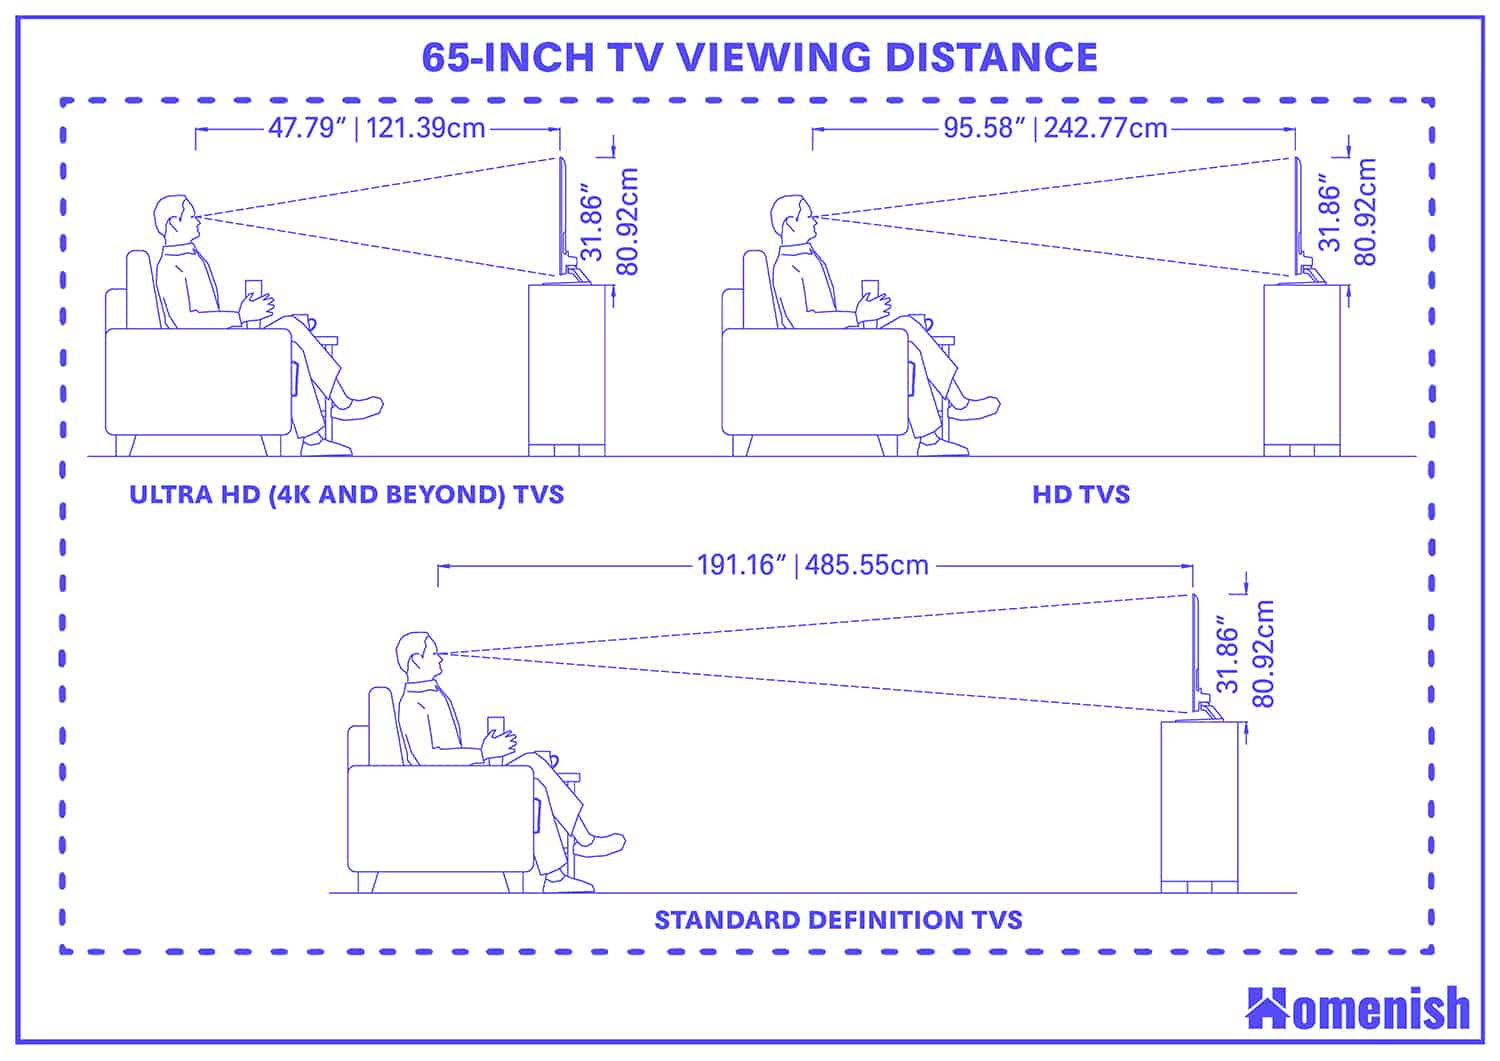 65-inch TV Viewing Distance